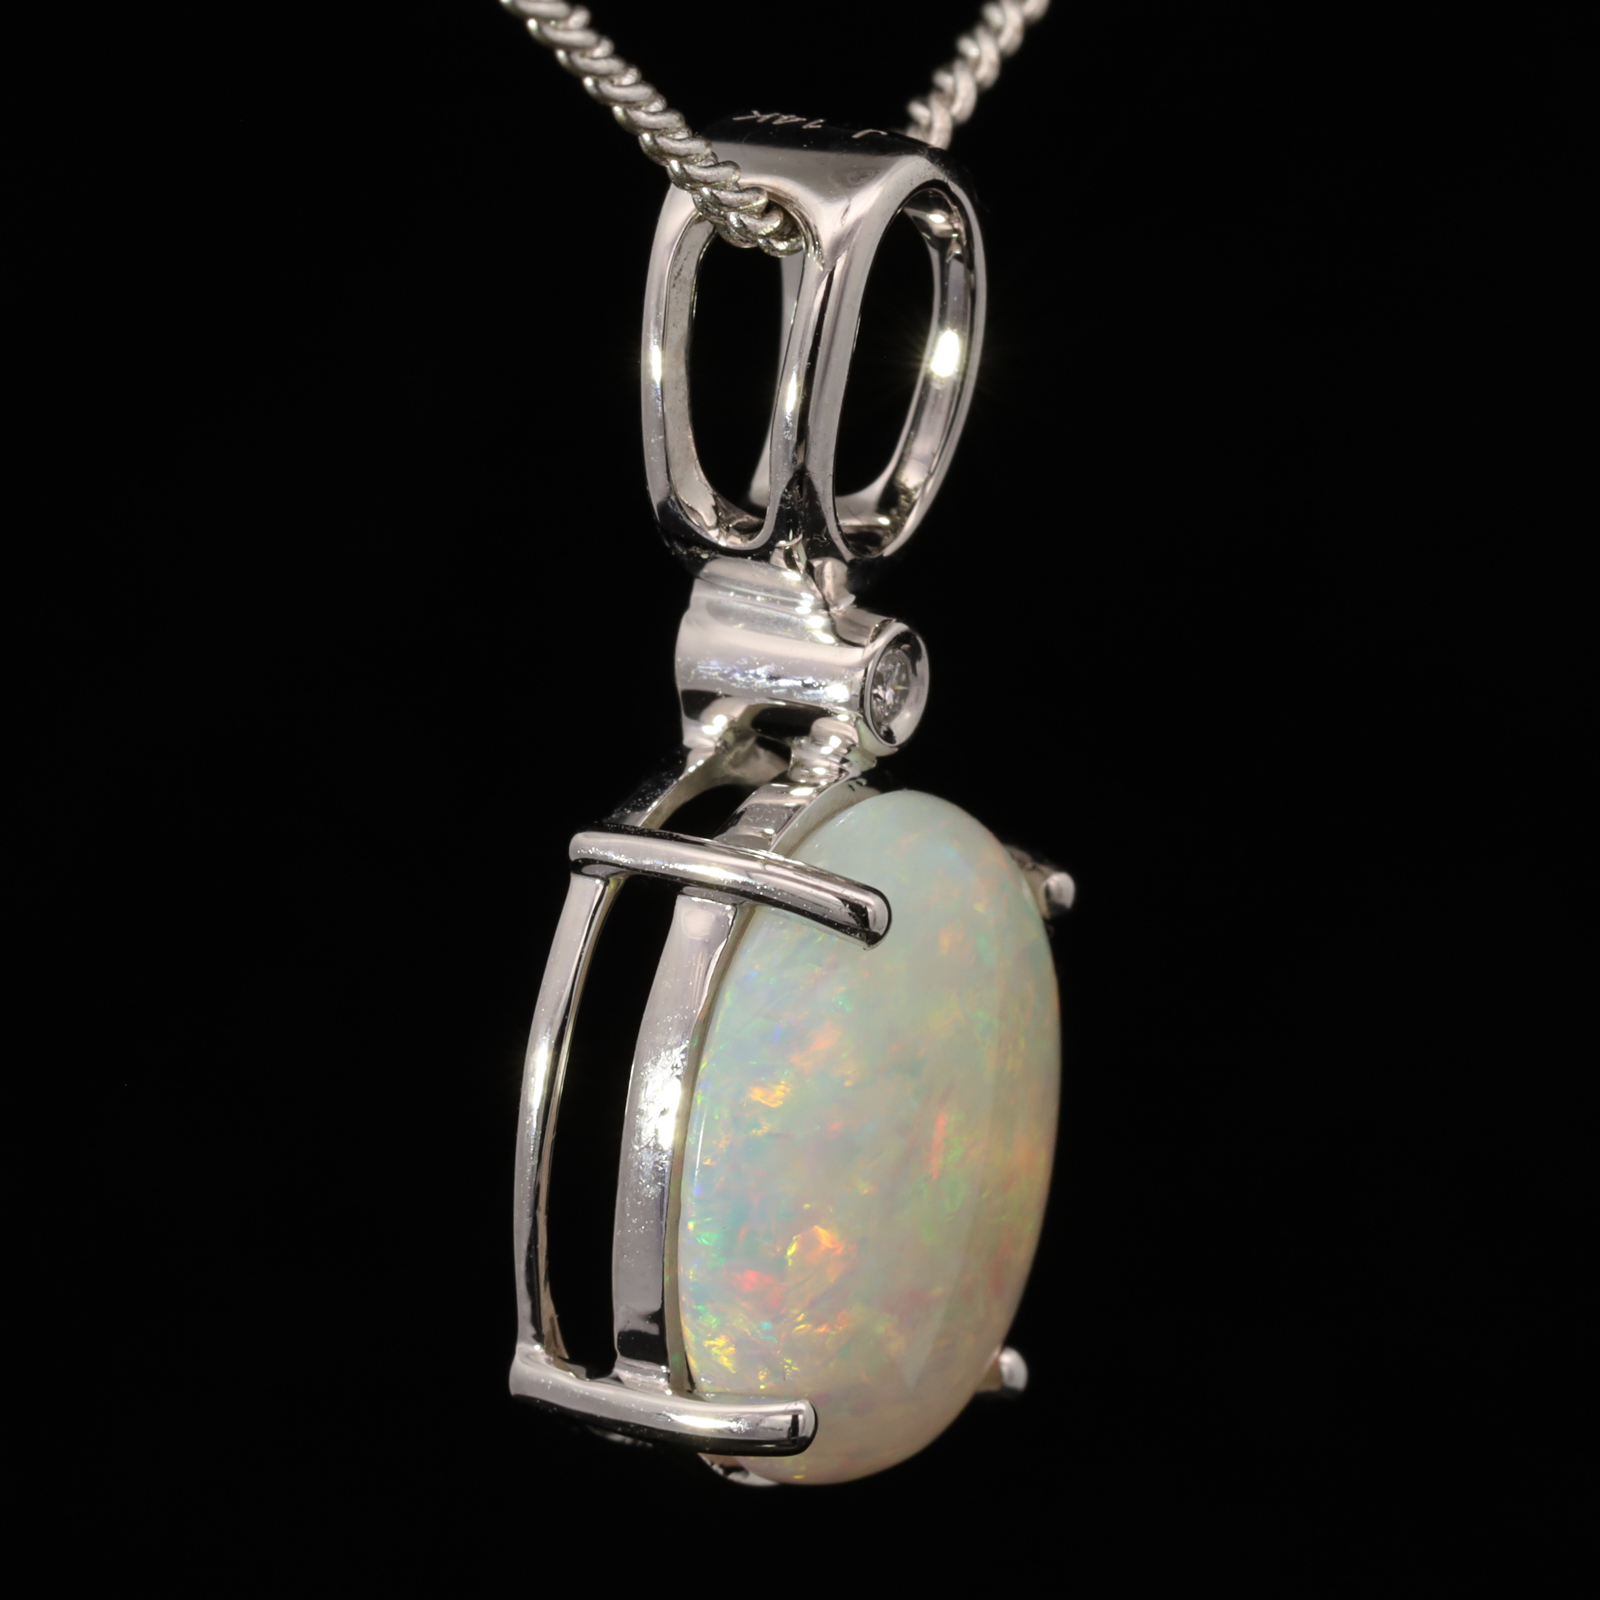 White Gold Blue Green Yellow Orange Pink Solid Australian Crystal Opal and Diamond Necklace Pendant